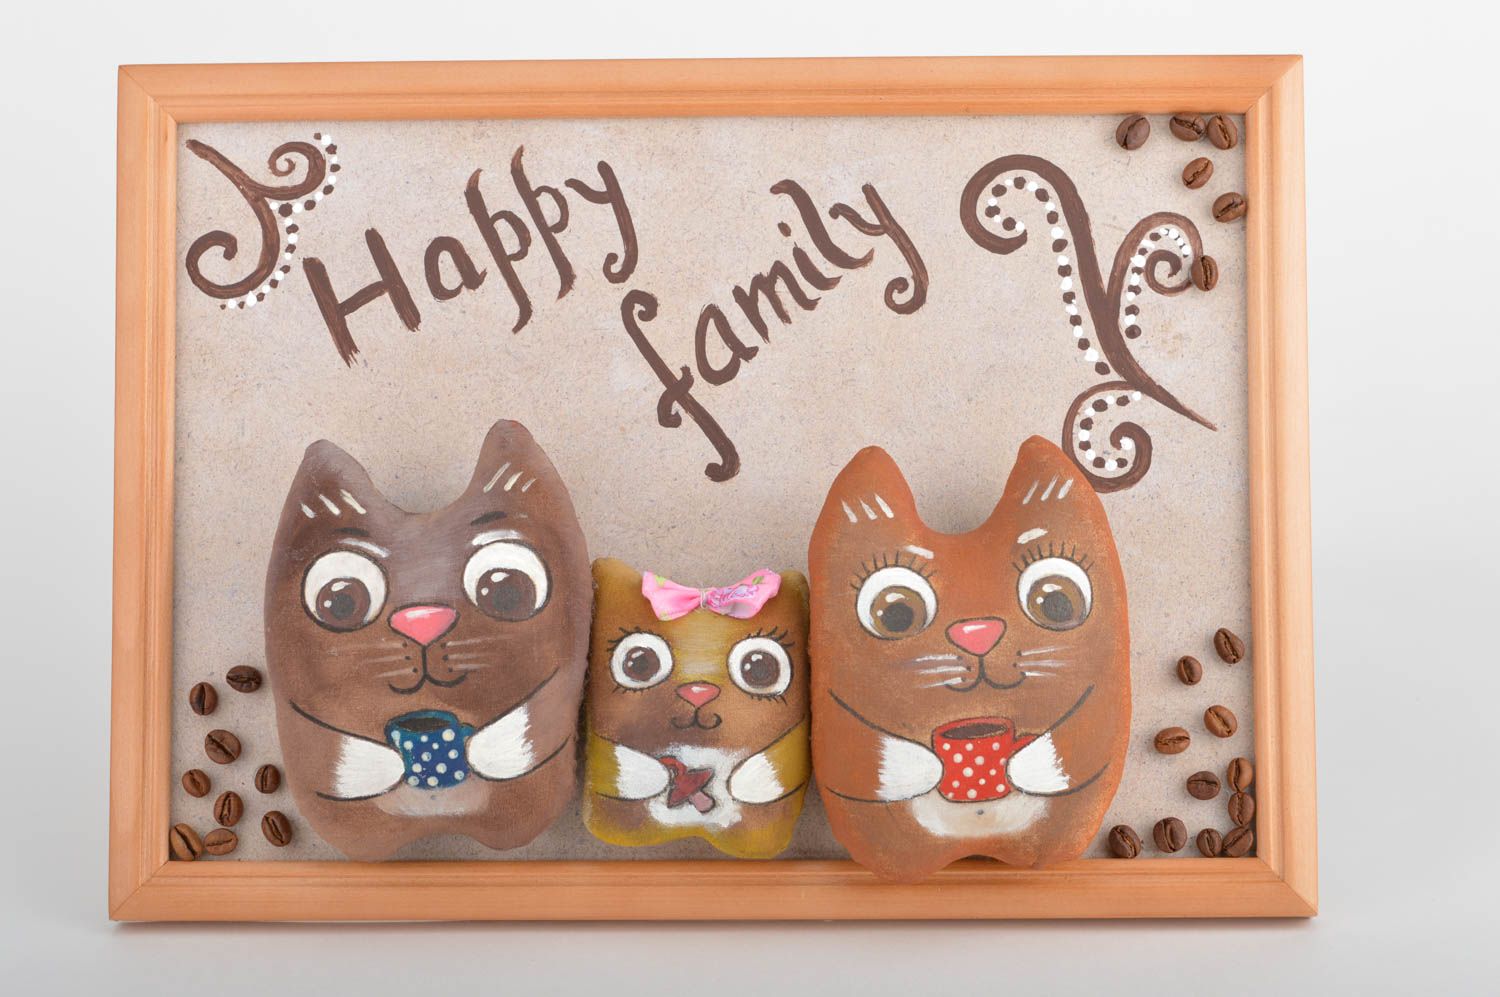 Handmade decorative wall panel with soft toys flavored cats interior decor ideas photo 2